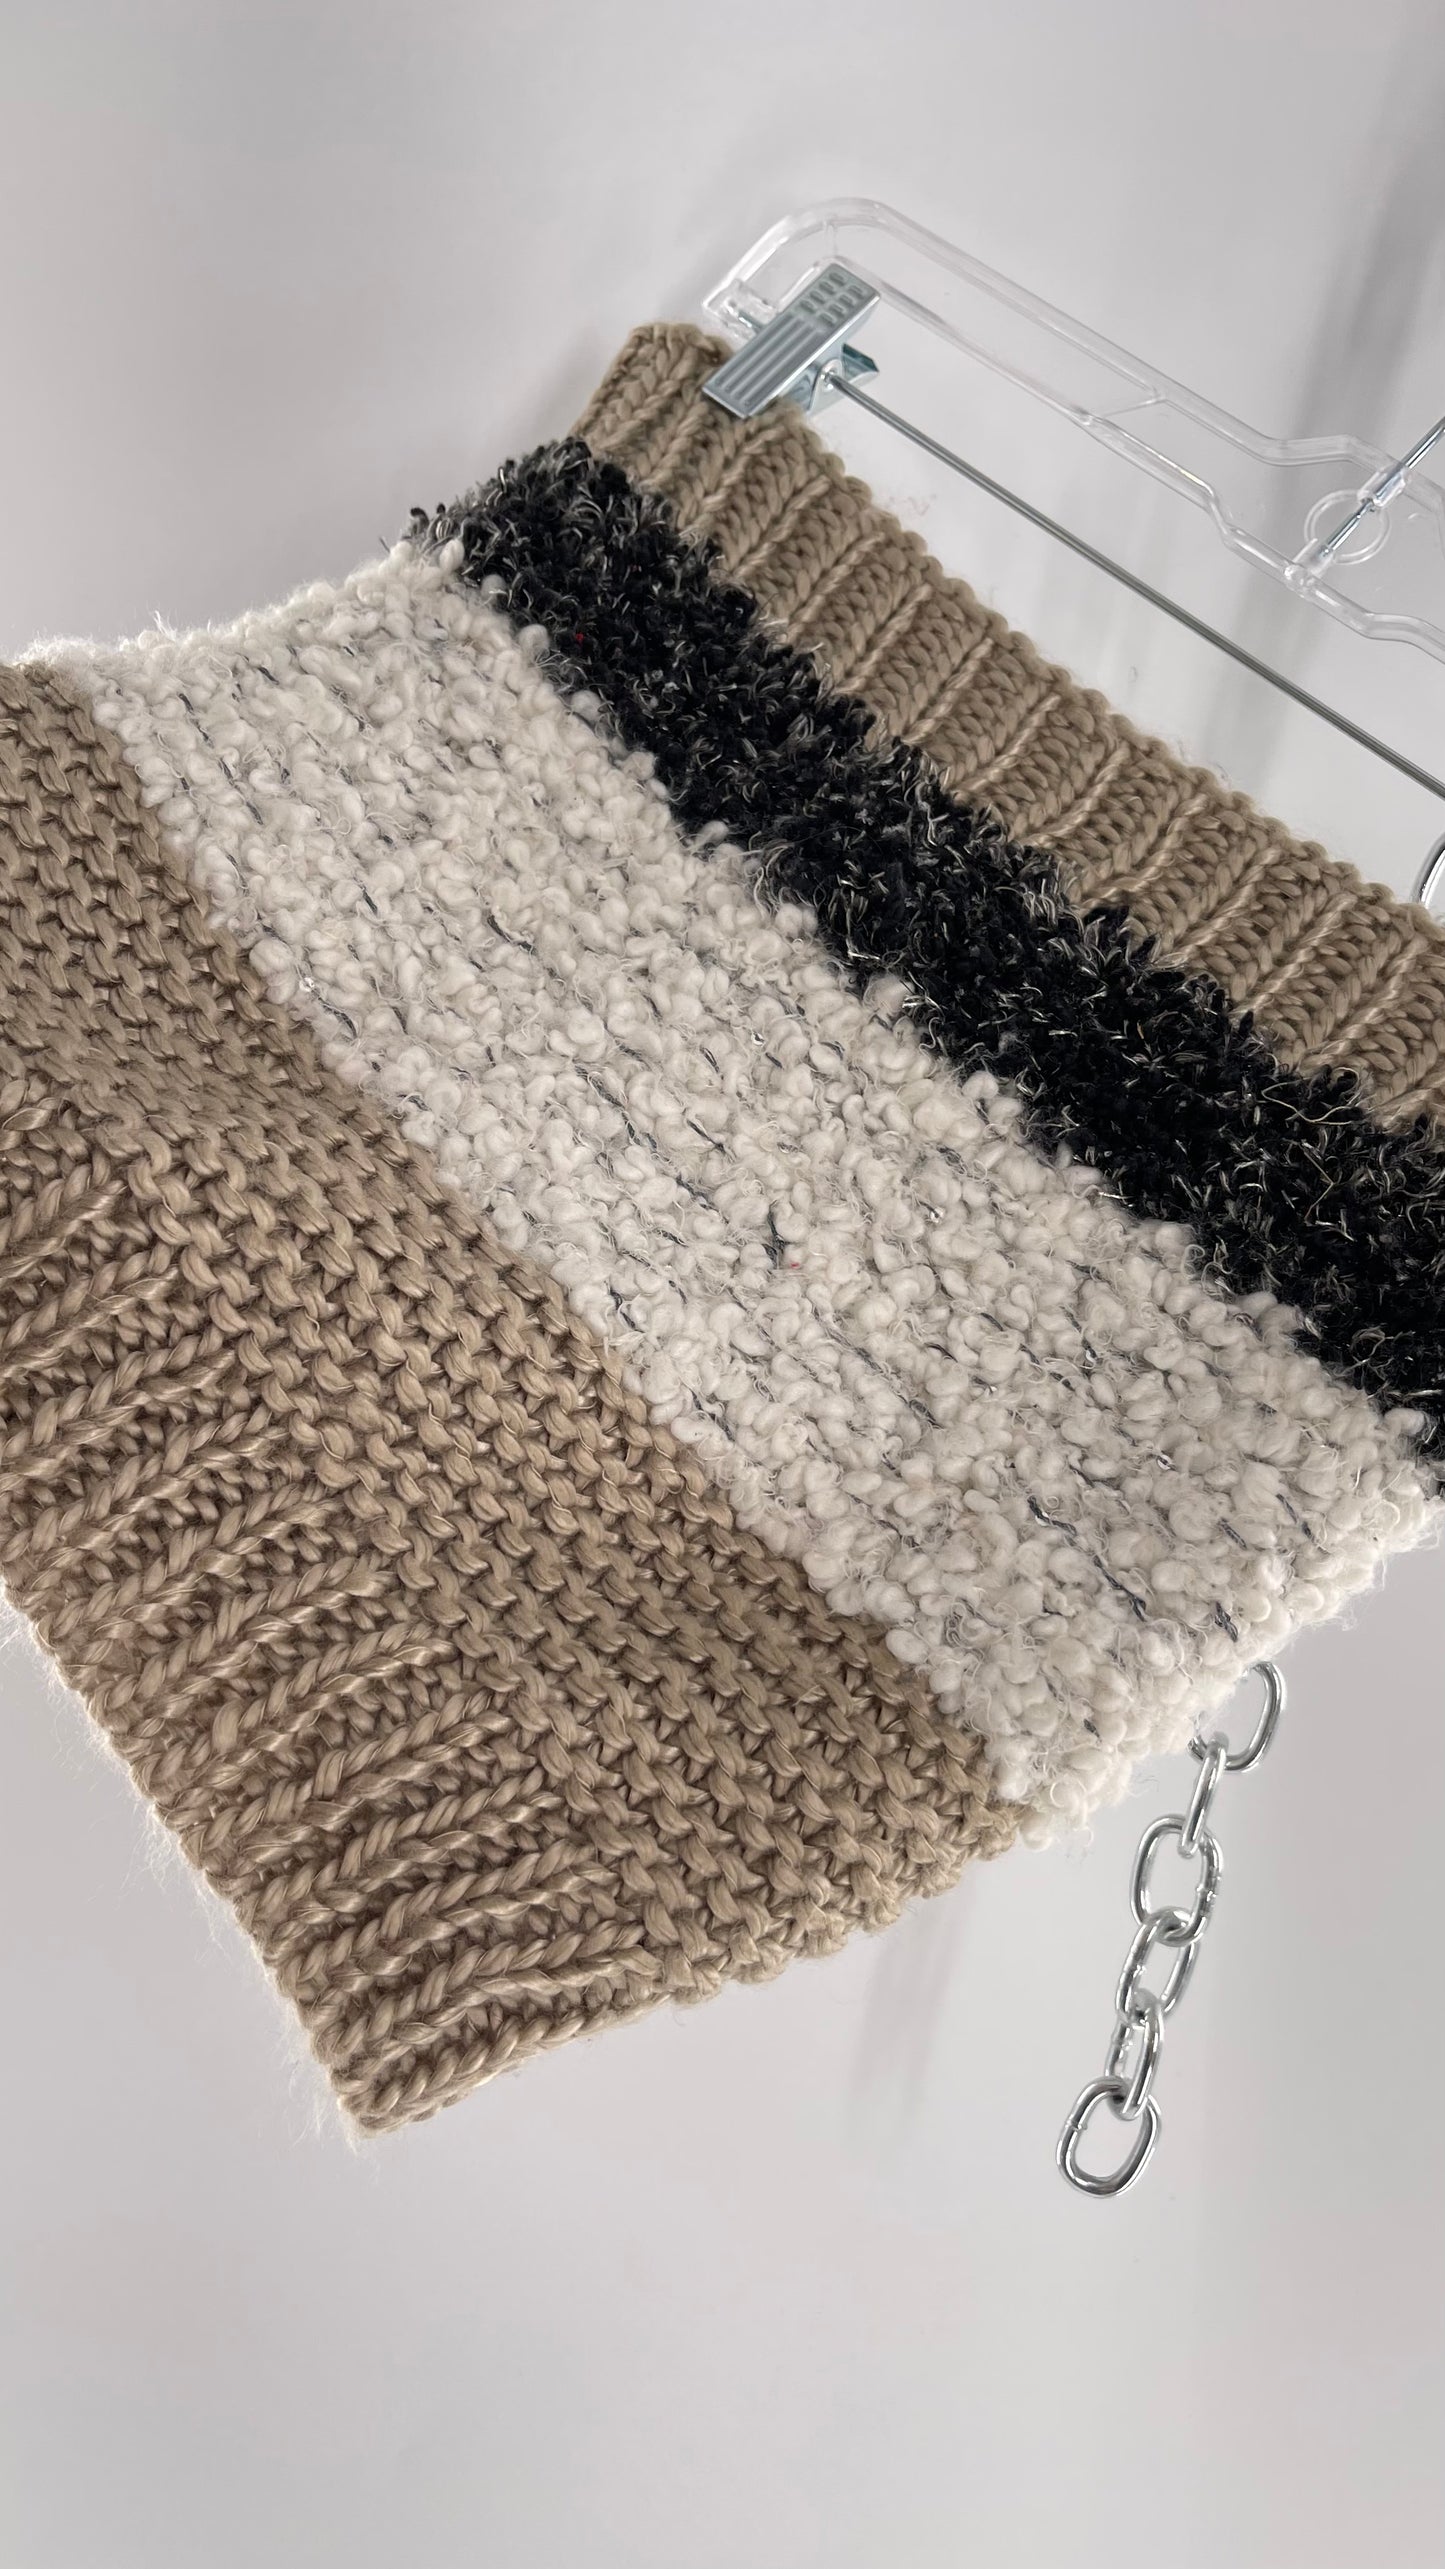 Anthropologie Sleeping on Snow Neutrals Knit Infinity Scarf is